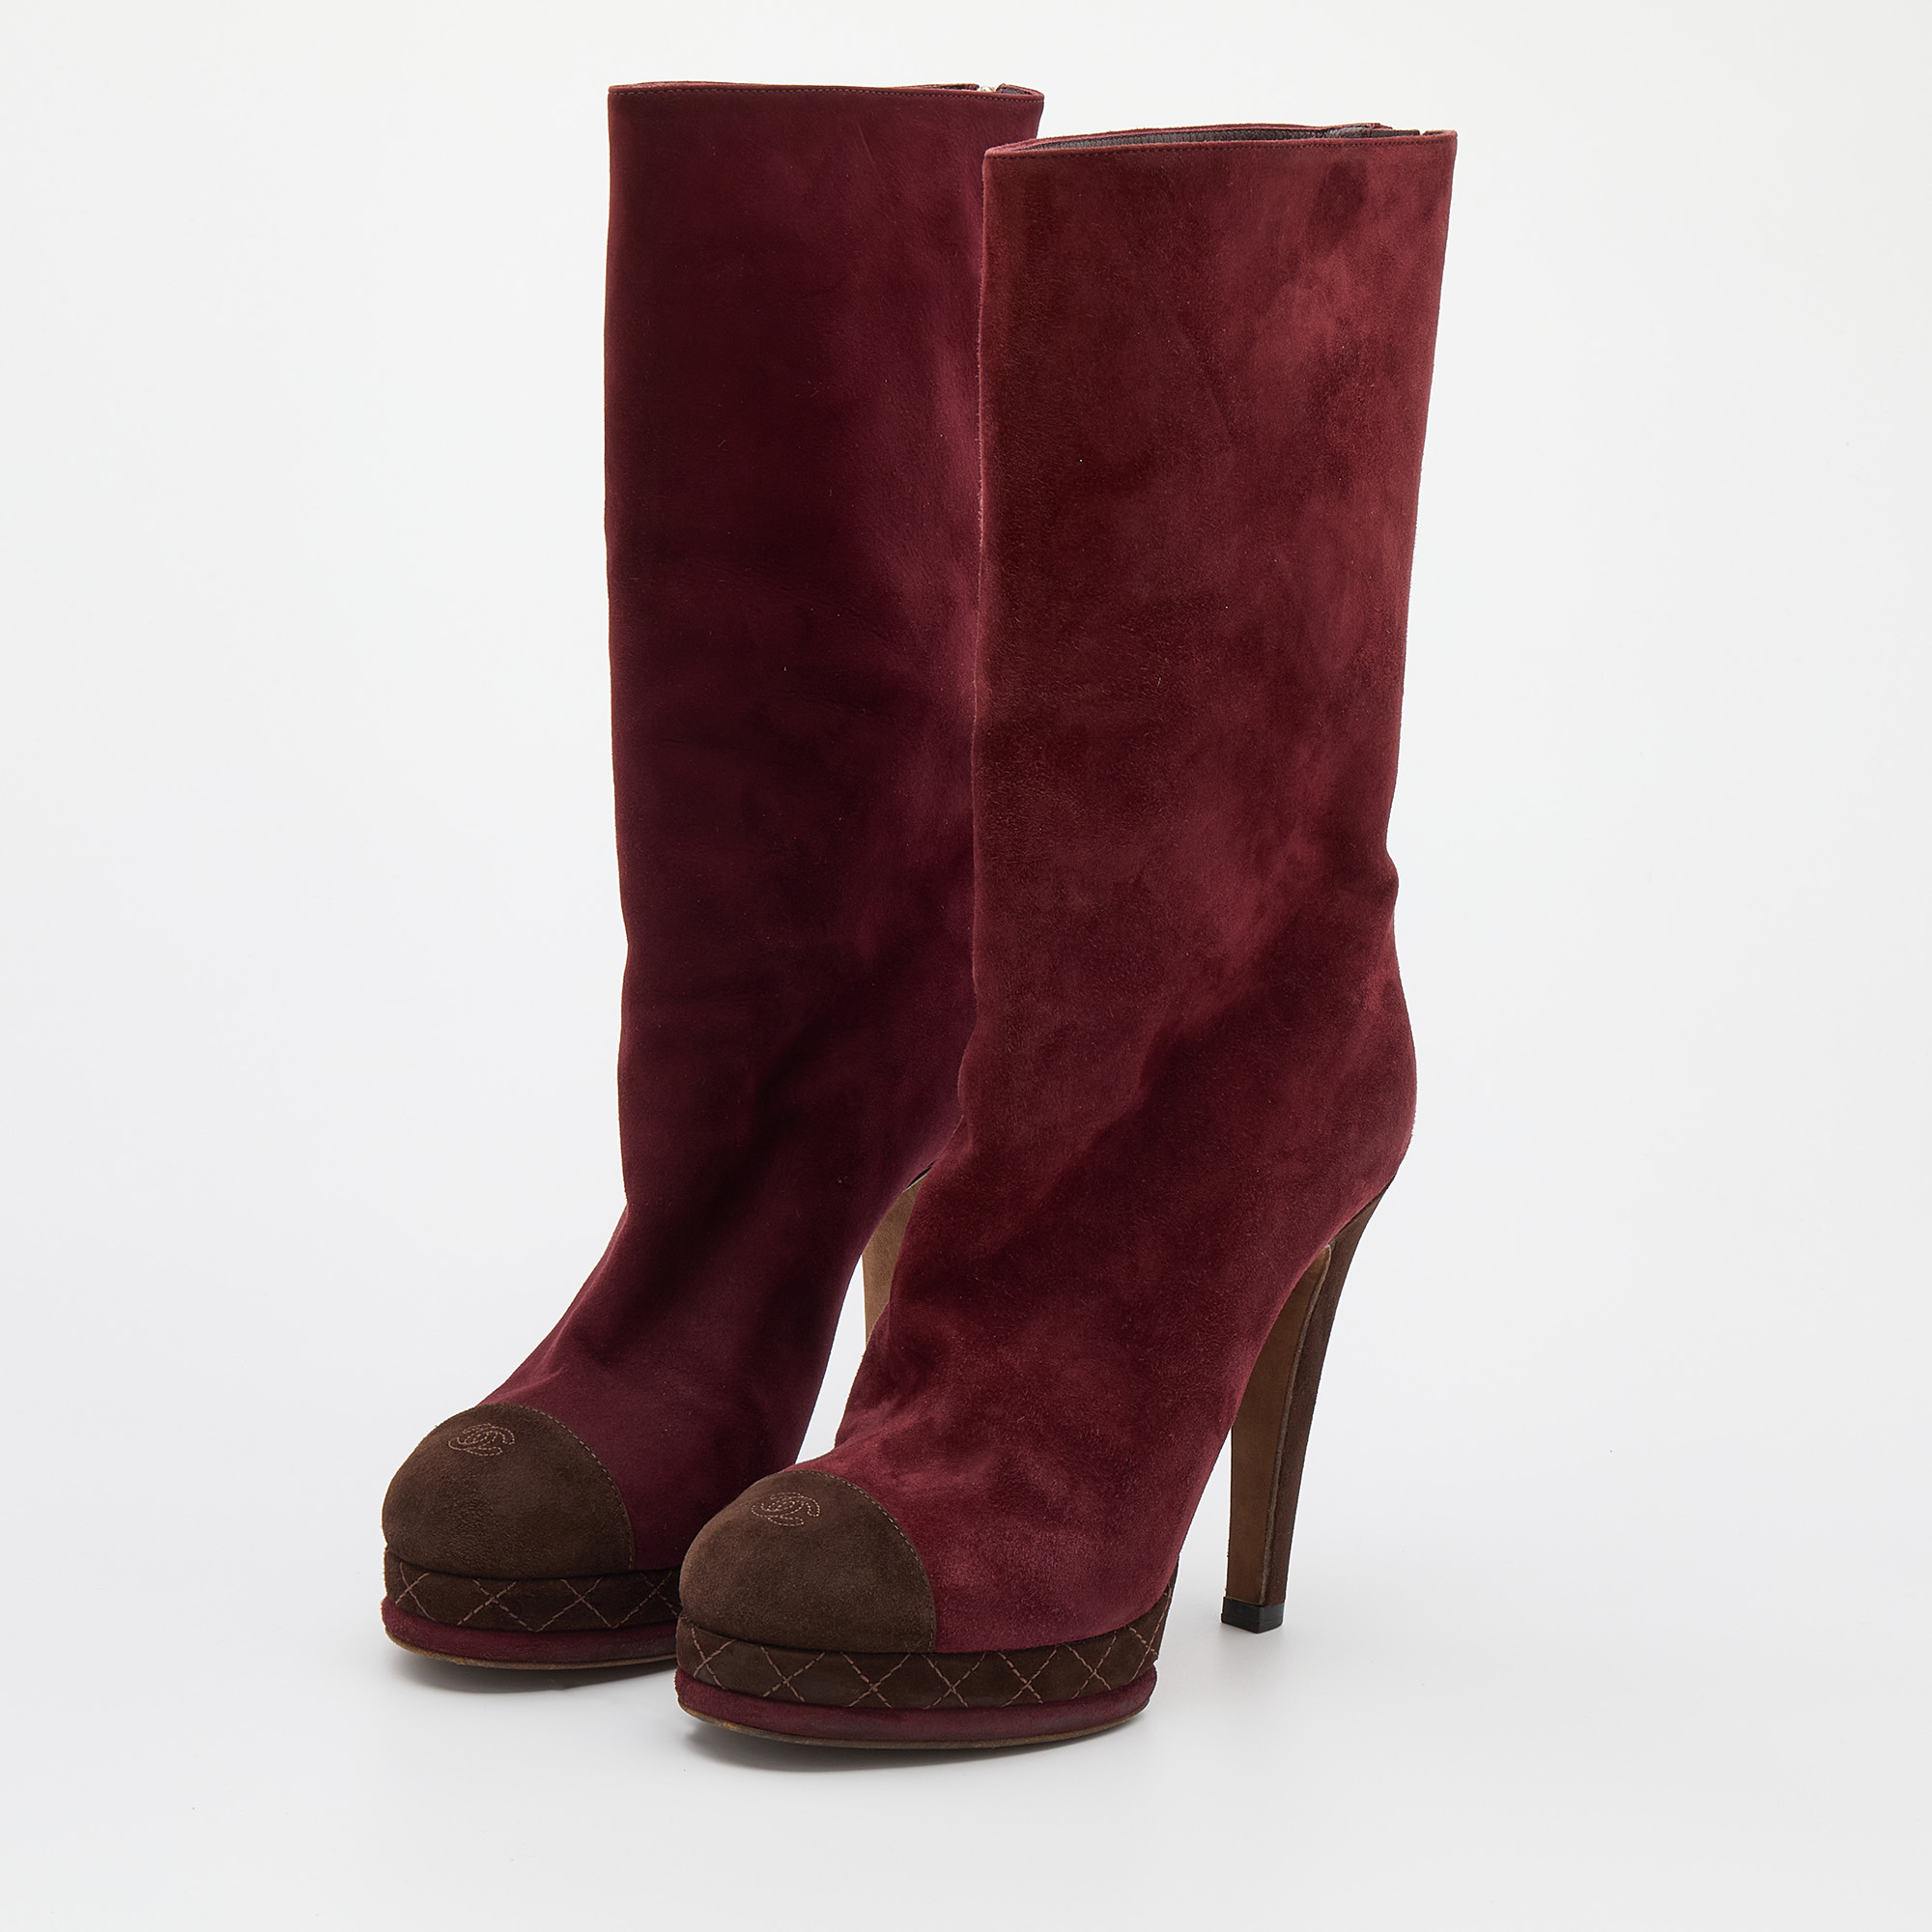 

Chanel Burgundy/Brown Suede CC Platform Mid Calf Length Boots Size